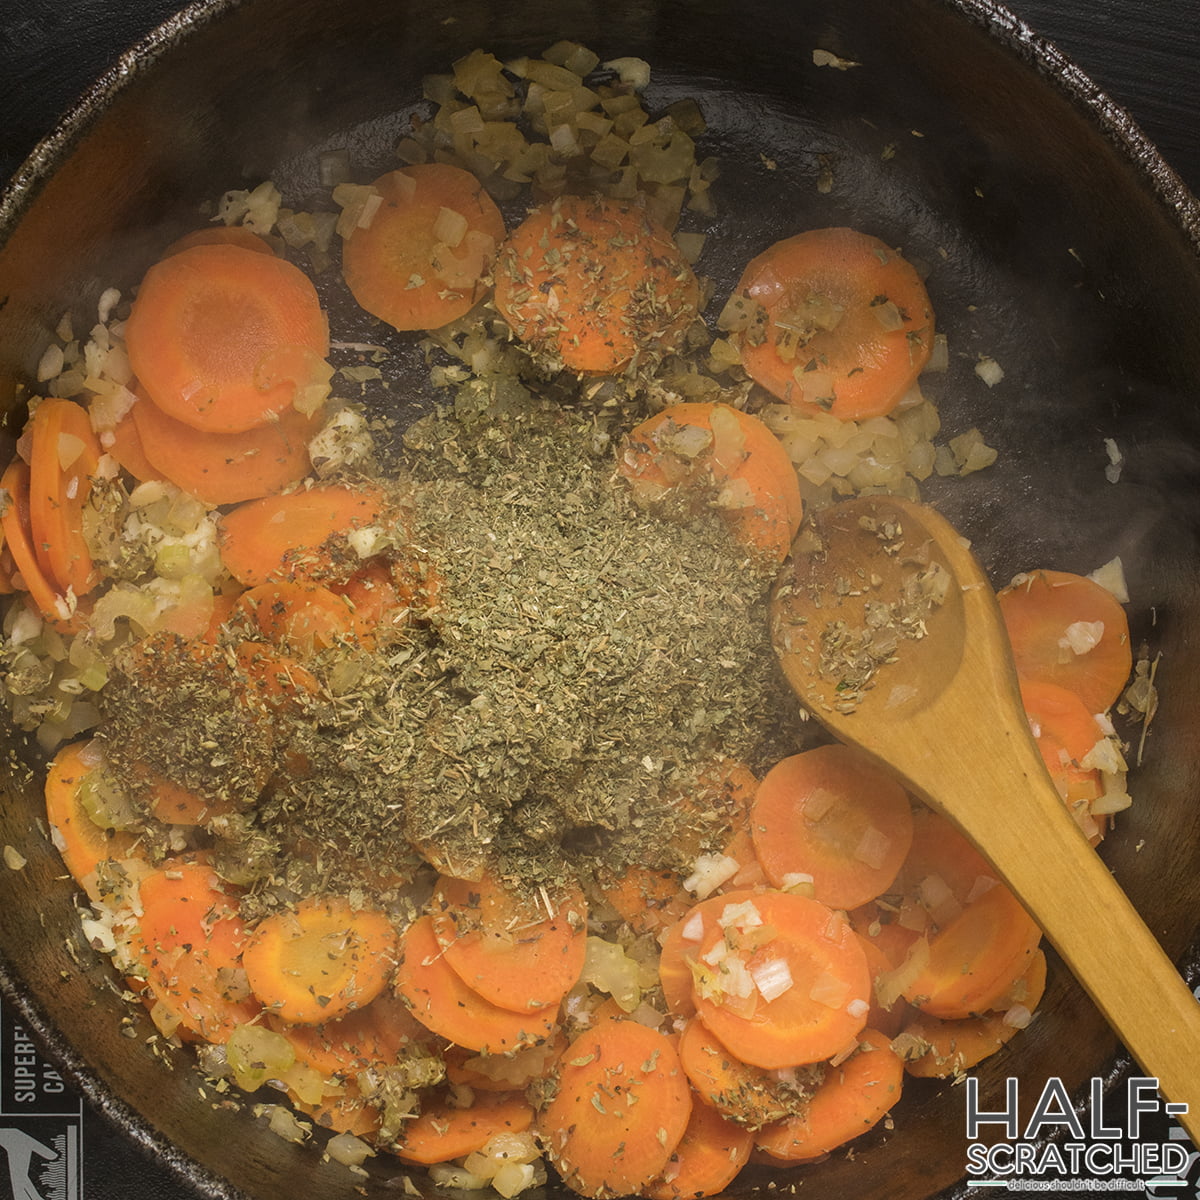 Adding seasoning to the sautéed carrots and onions